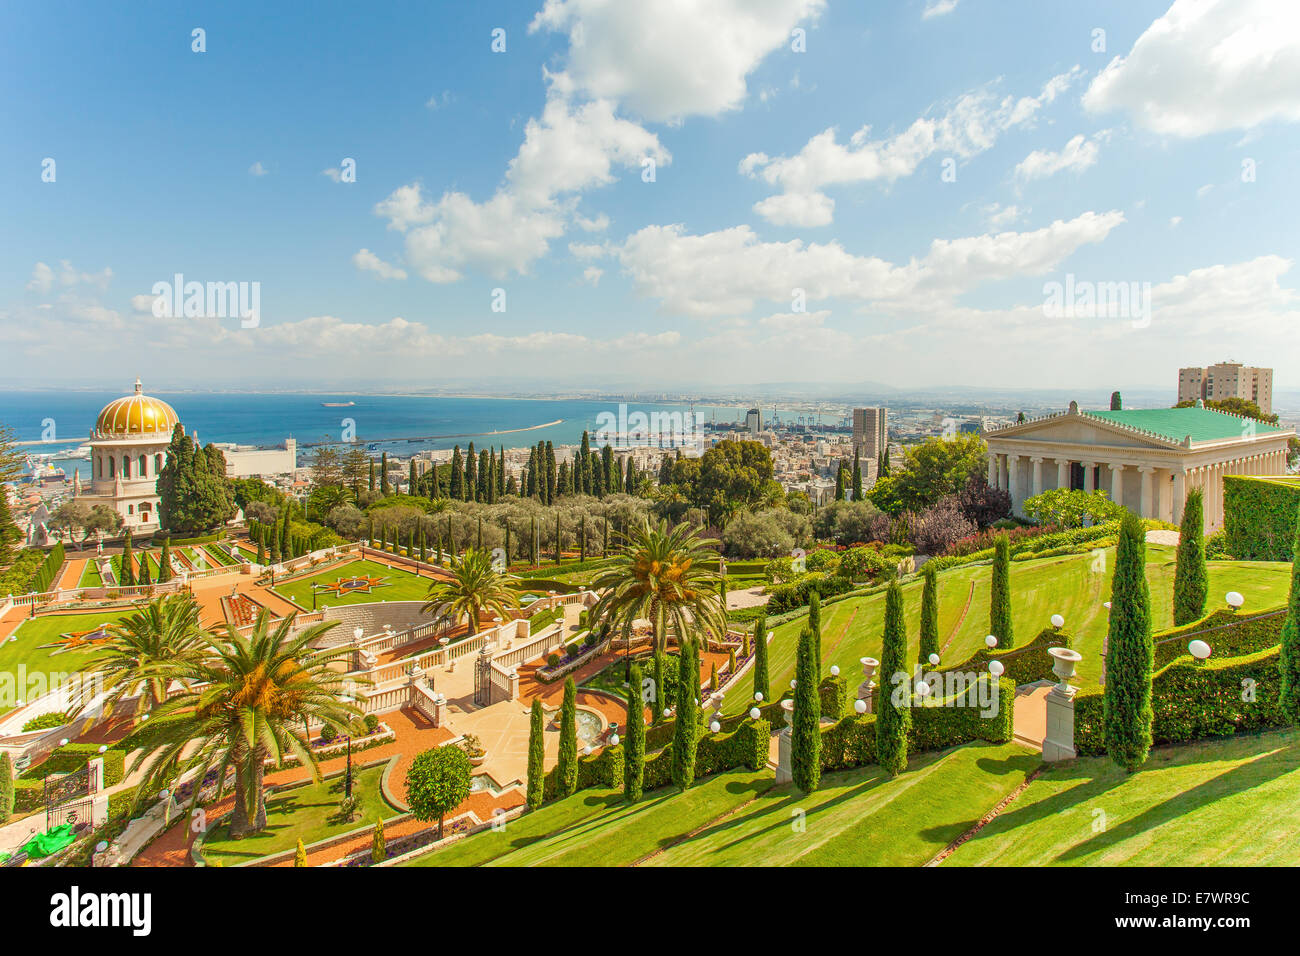 A beautiful picture of the Bahai Gardens in Haifa Israel. Stock Photo